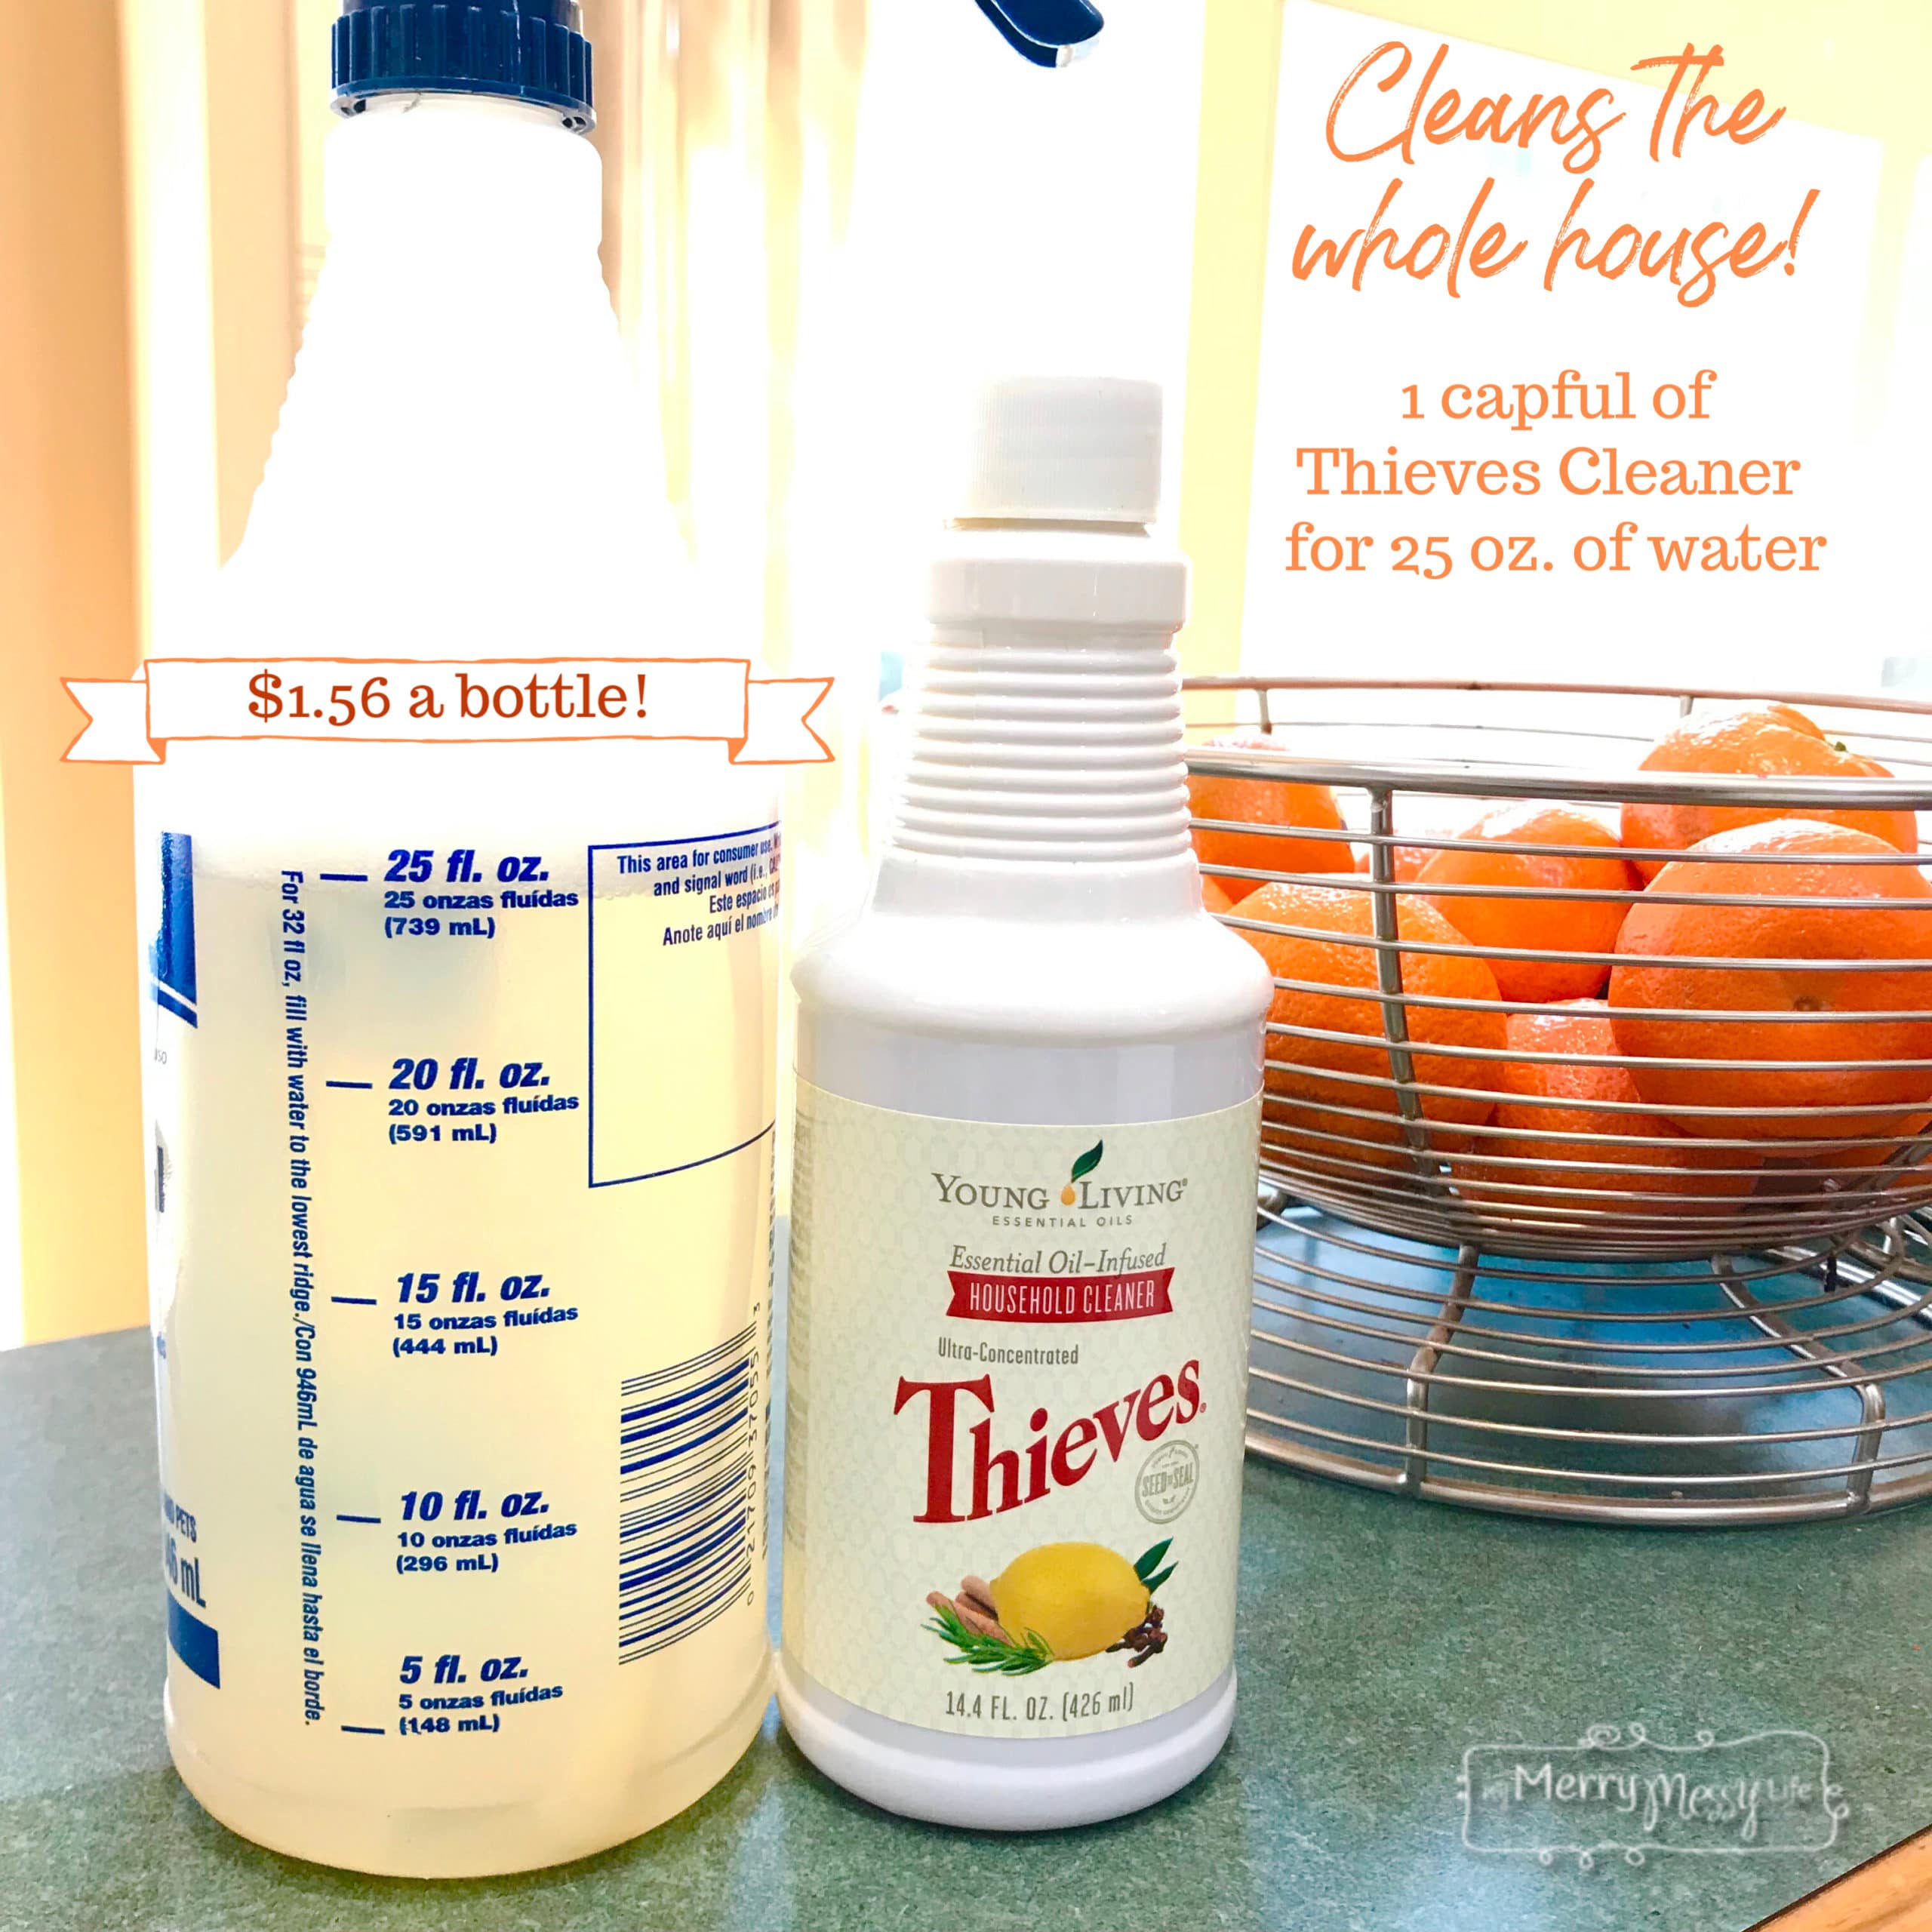 You can clean your WHOLE house naturally and safely for just $1.56 a bottle using Thieves Household Cleaner!